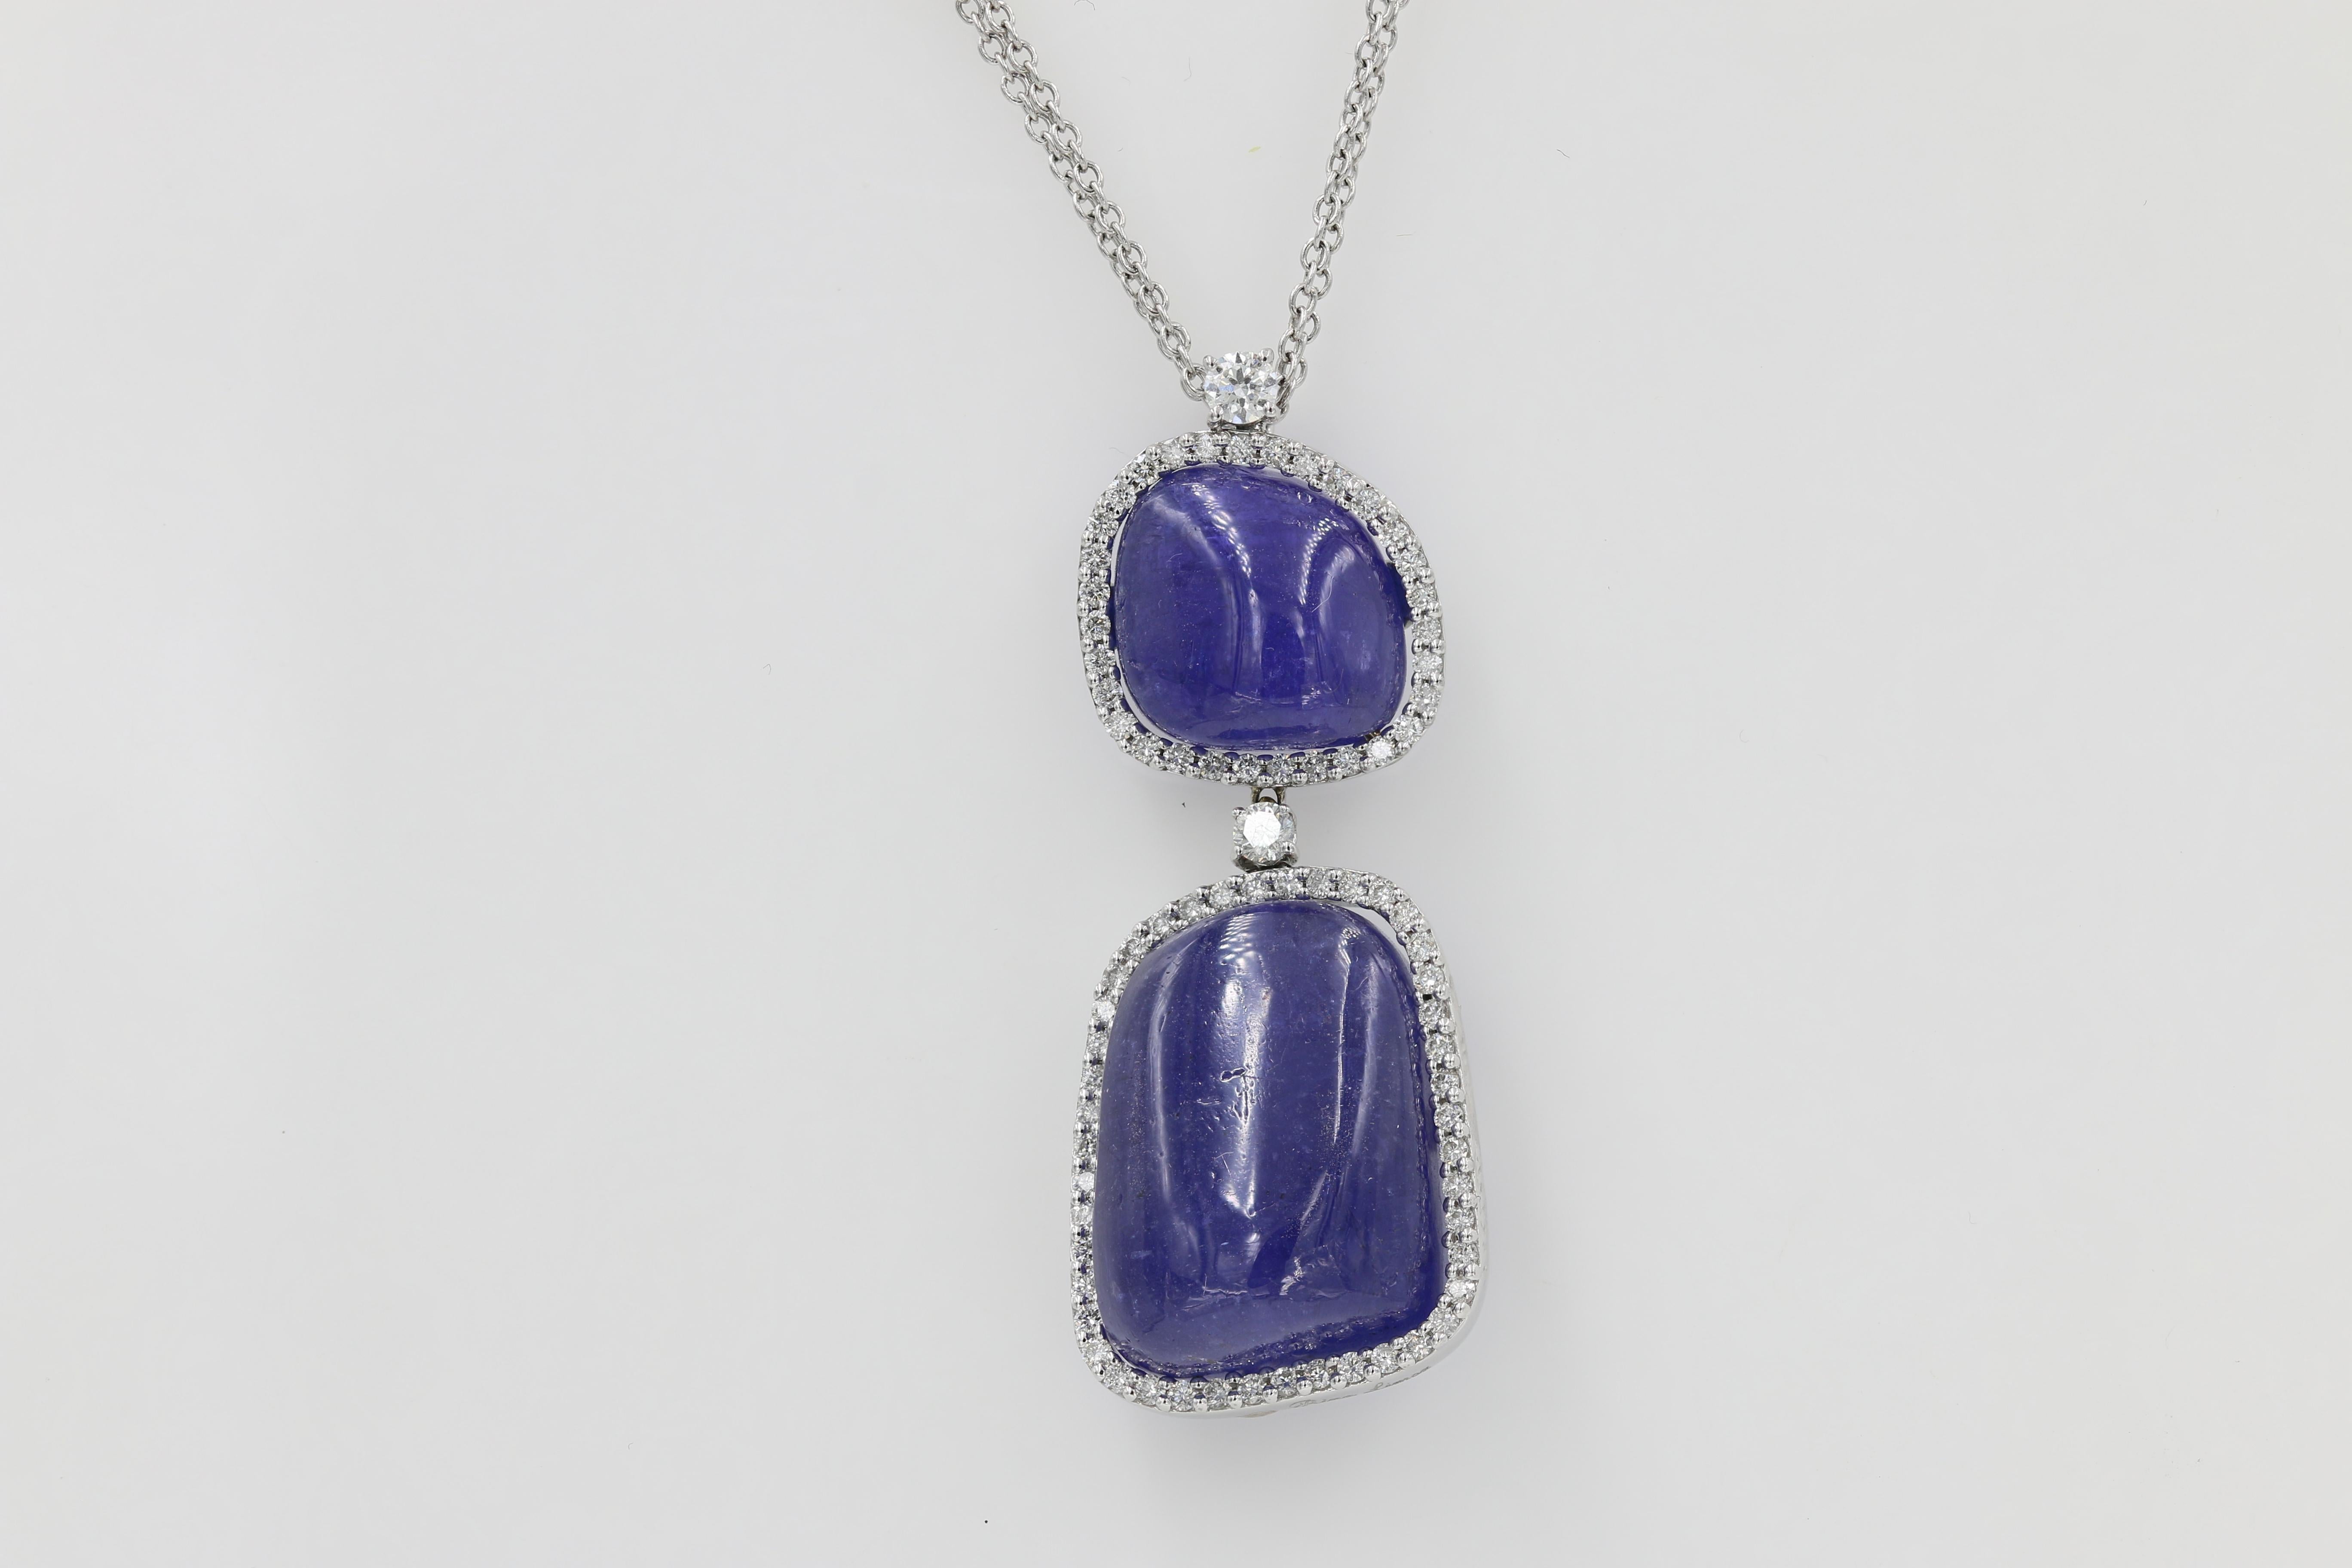 This lovely 18kt. White gold necklace features 2 Tanzanite Cabochon cuts weighing approximately 52cts. total with 77 Round diamonds weighing 0.86ct. total.	

The necklace features a double chain at 16” in length. This piece is by Rina Limor. 
